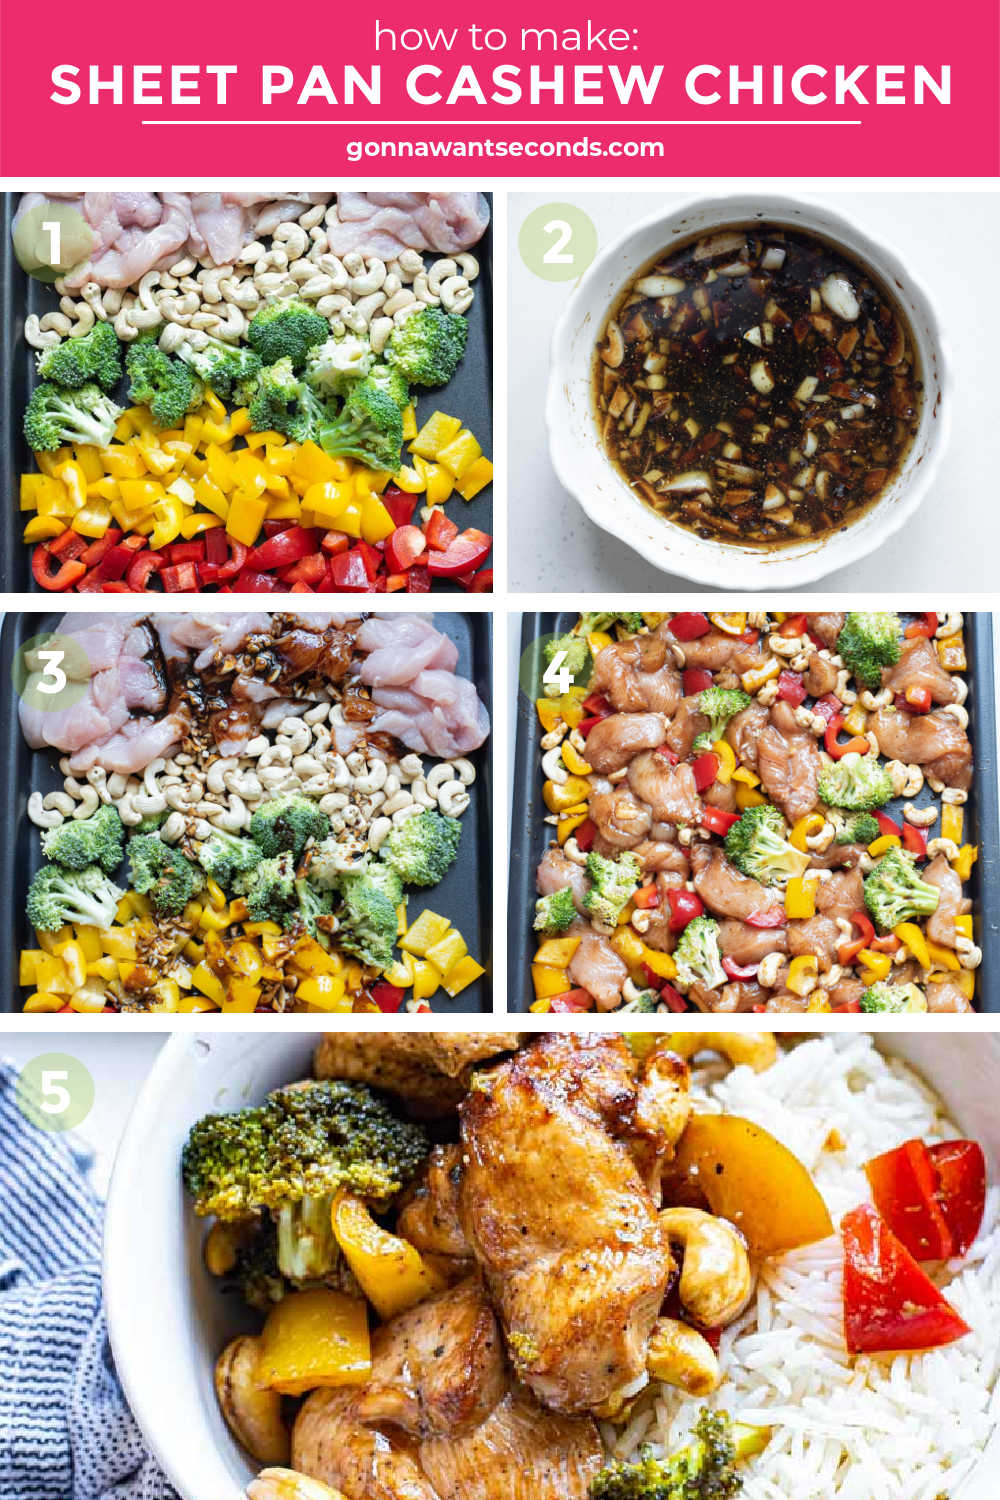 step by step how to make sheet pan cashew chicken